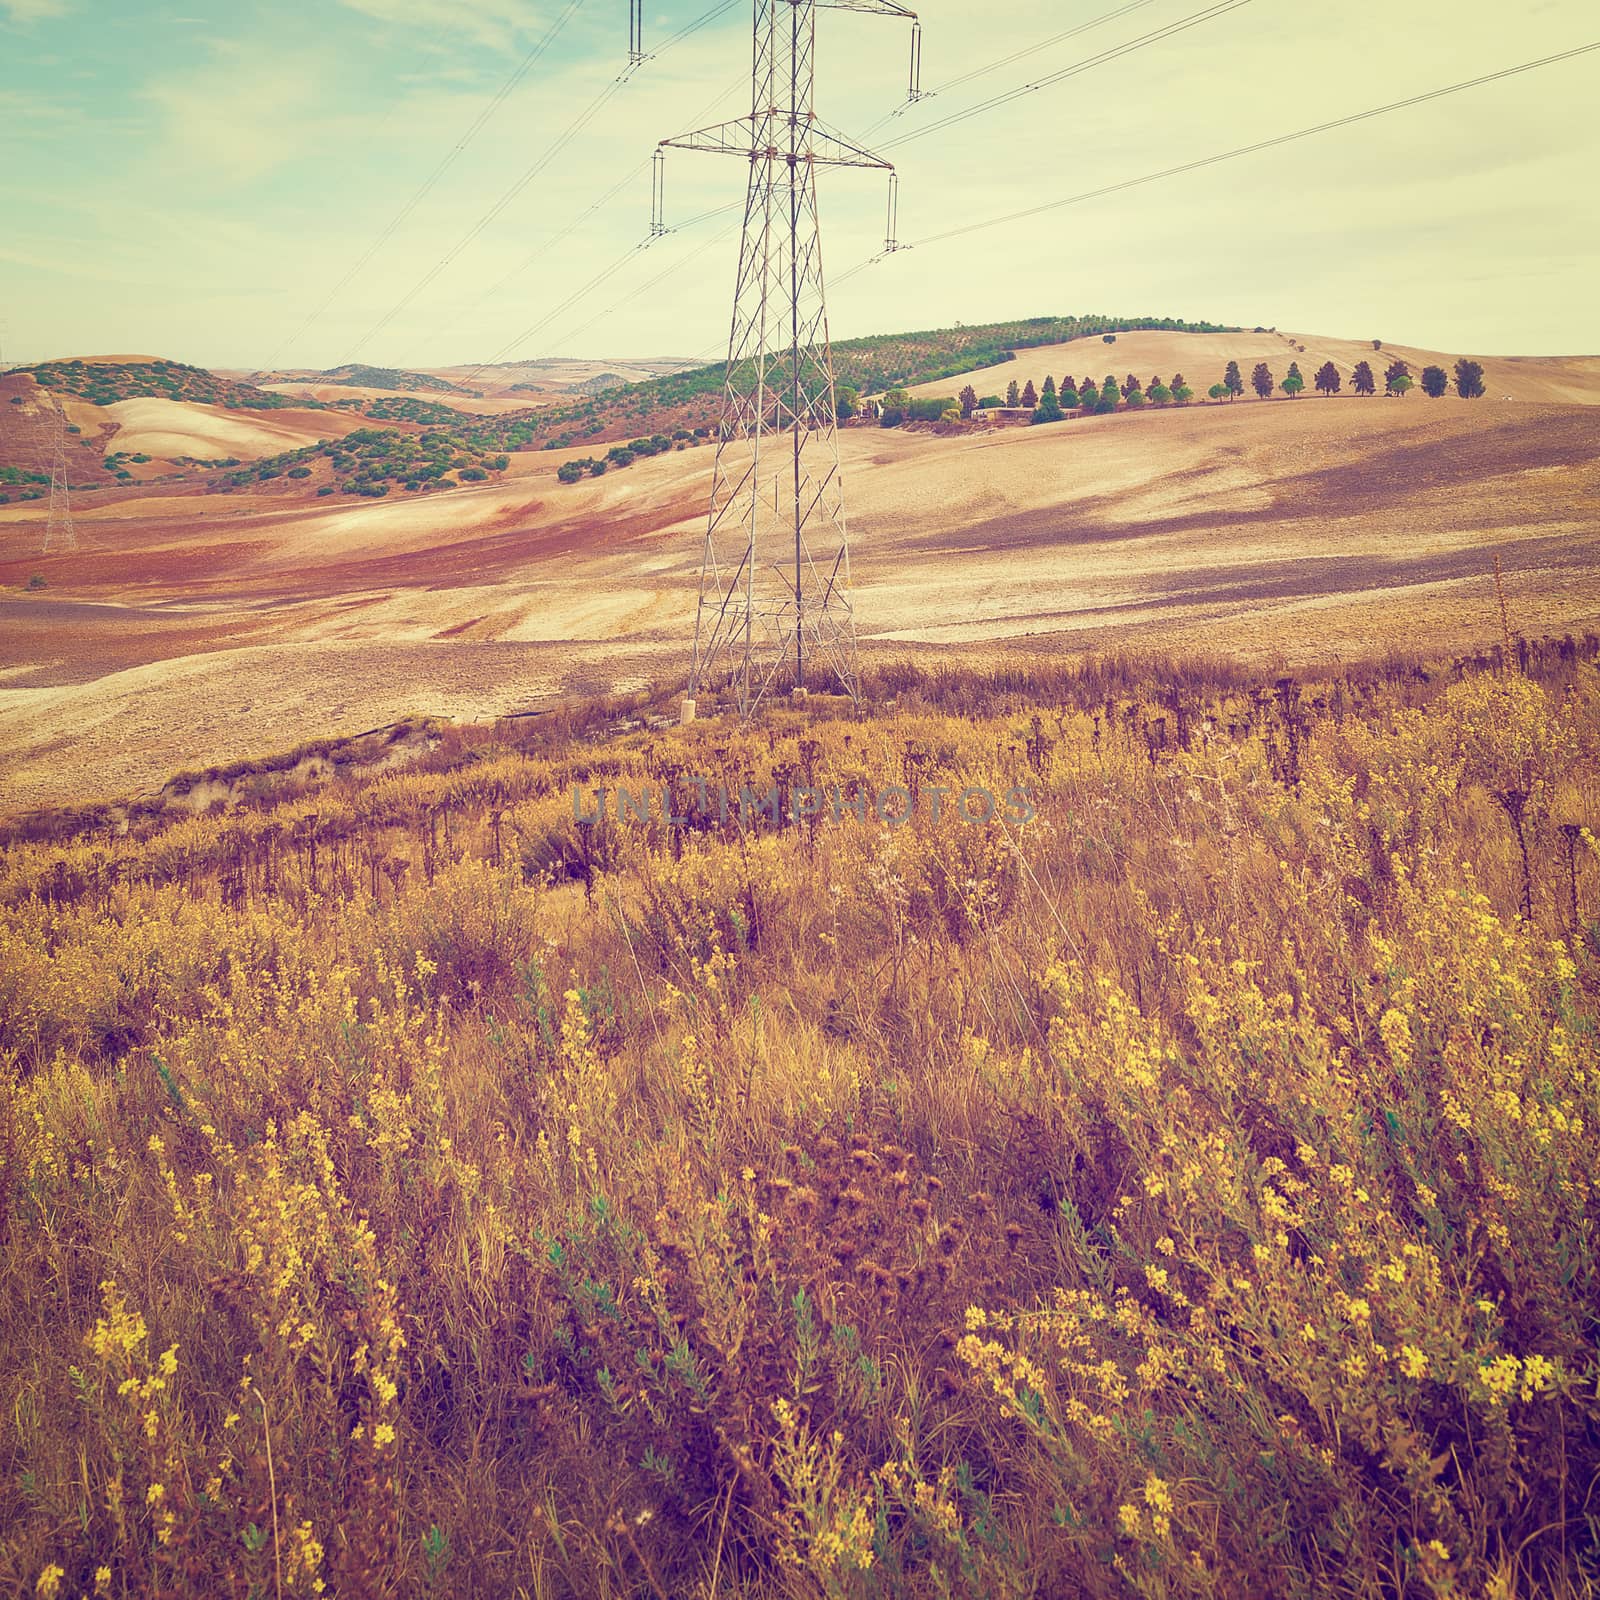 Power Line on the Plowed Field in Spain, Vintage Style Toned Picture